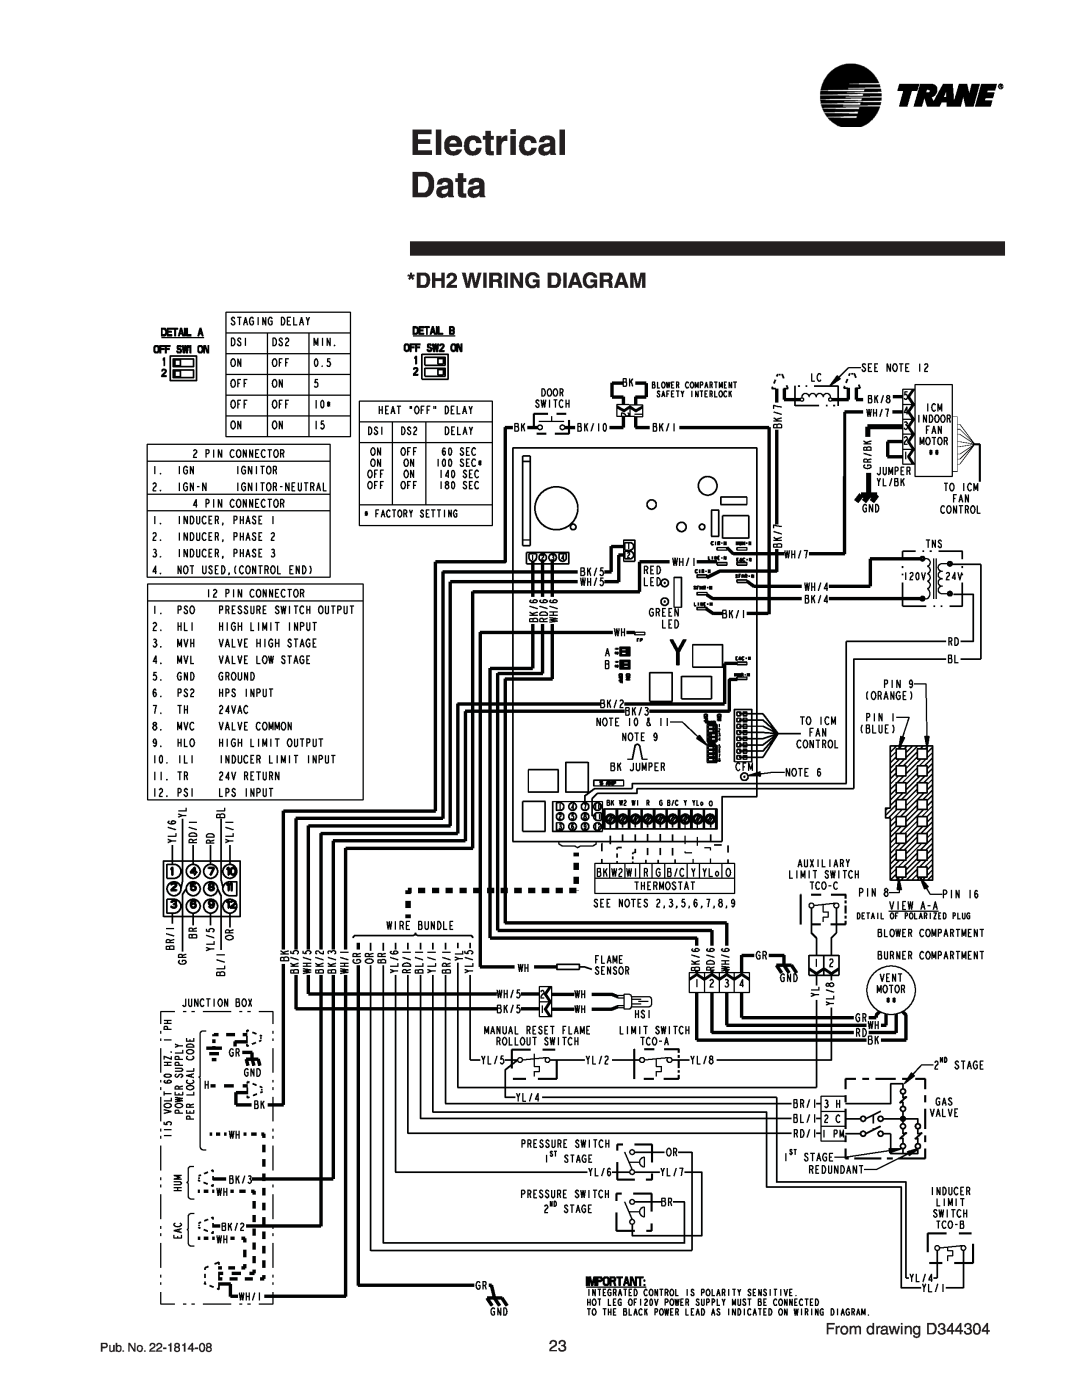 Trane TUH2D120A9V5VA, TUH2C100A9V5VA, TUH2C100A9V4VA manual Electrical Data, DH2 WIRING DIAGRAM, From drawing D344304 